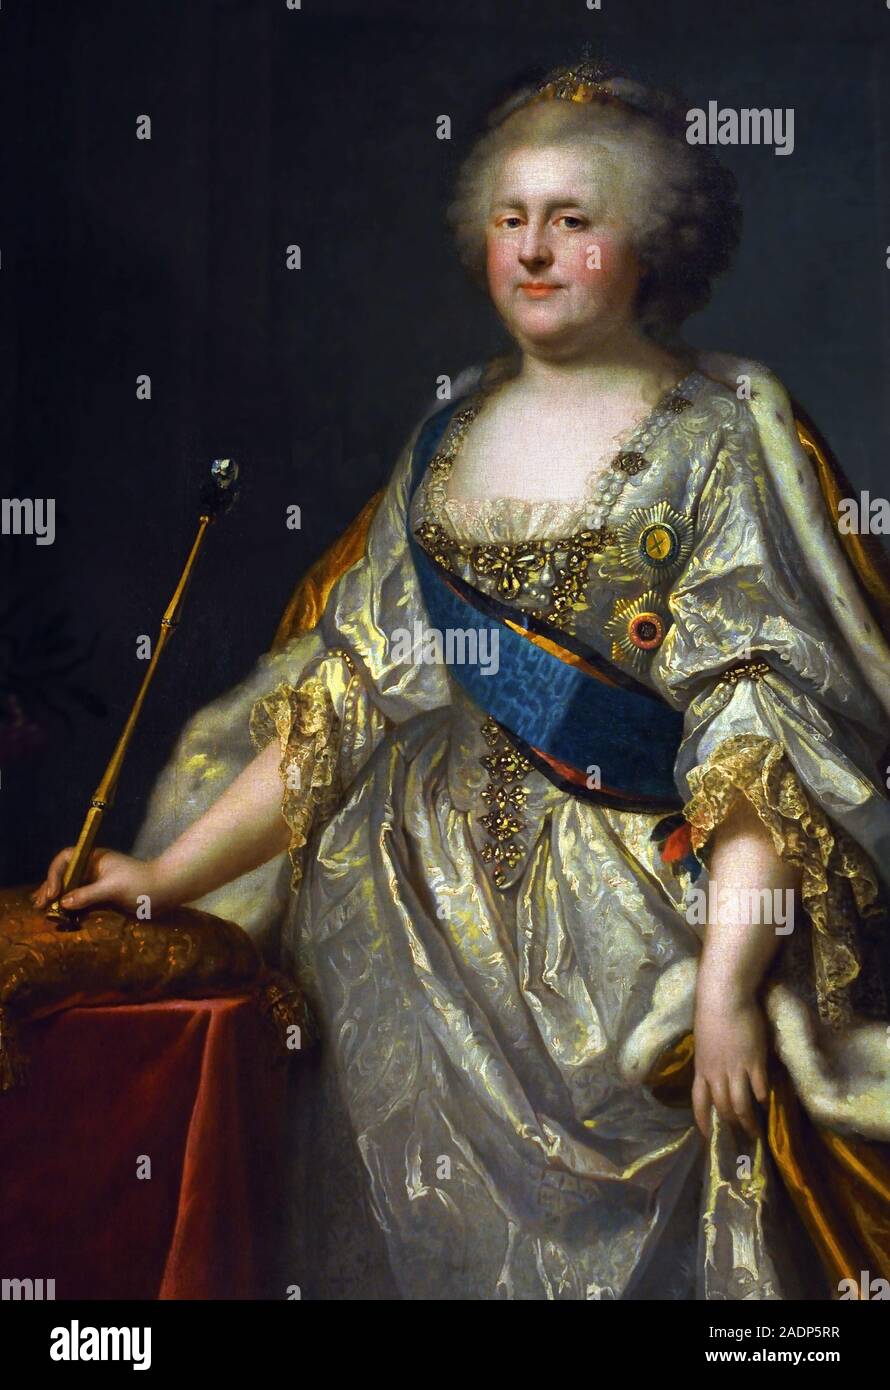 Empress Catherine II of Russia - Catherine the Great (1729-1796) Johann Baptist Lampi the Elder - Johann Baptist Lampi I (1751-1830) , Jewels of Russian imperial court, 18th-19th Century, Russia. Stock Photo